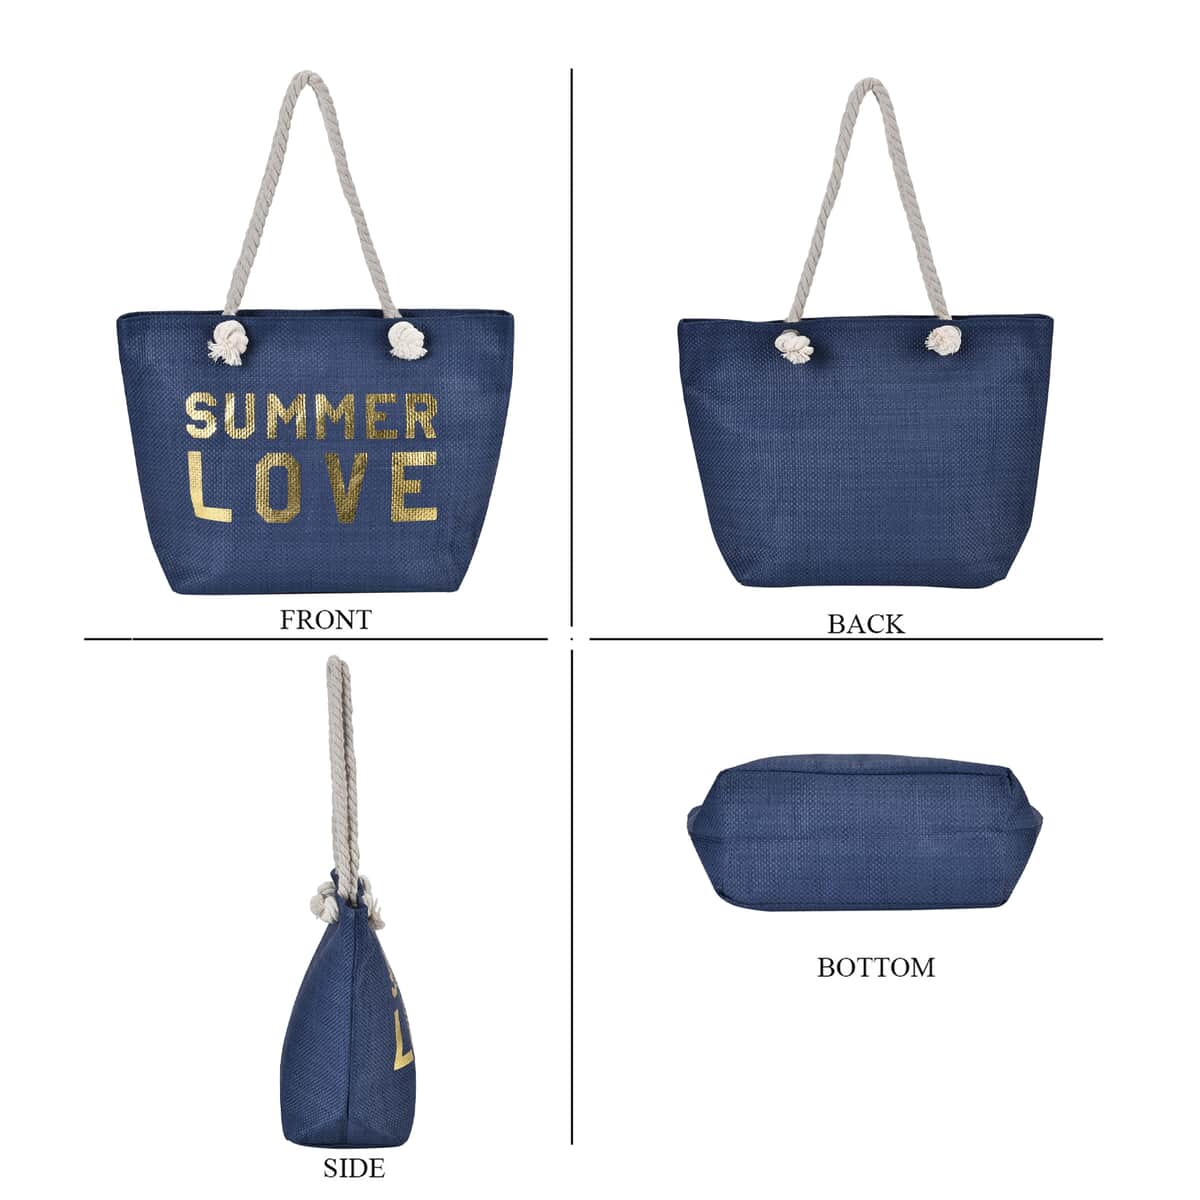 Paper Tote Bag with Printed SUMMER LOVE - Navy image number 1